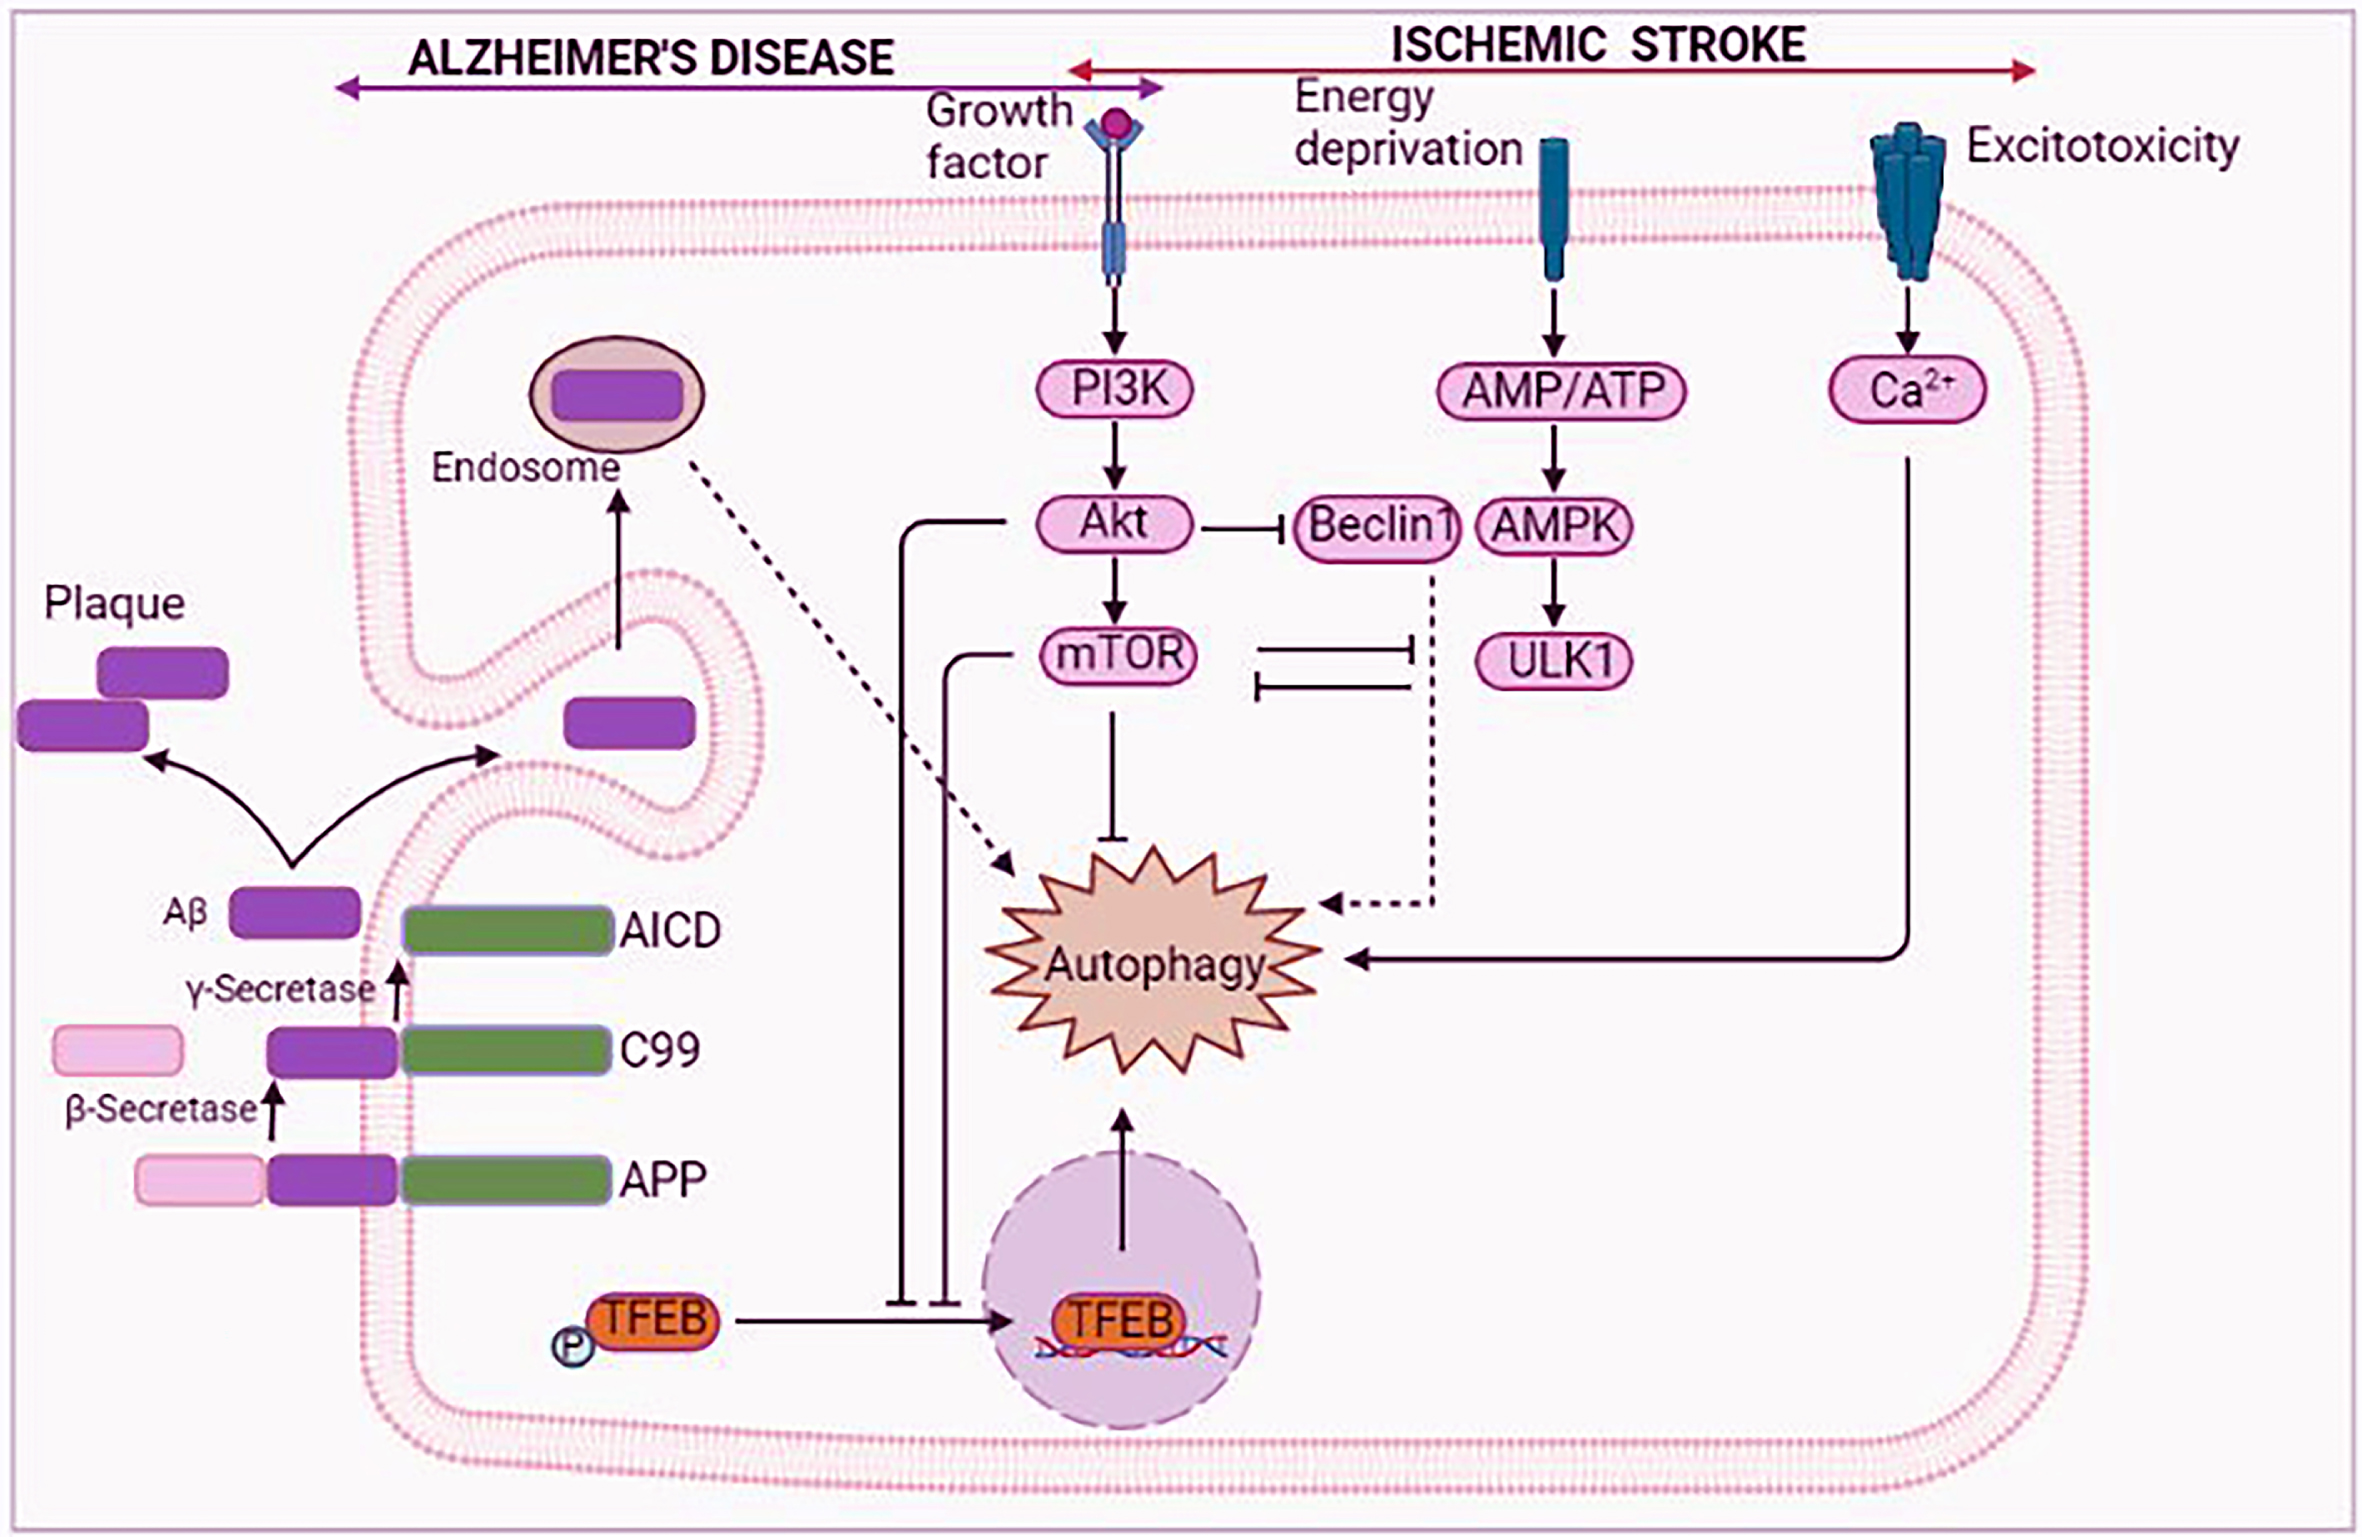 Schematic representation of mTOR-autophagy pathway in Alzheimer’s disease (AD) and ischemic stroke (IS). In AD, Aβ participate in autophagy via the endosome. The downregulation of mTOR-autophagy pathway is found in AD and IS. AICD, amyloid precursor protein intracellular domain; Akt, protein kinase B; AMP, adenosine 5’-monophosphate; AMPK, adenosine monophosphate-activated protein kinase; APP, amyloid precursor protein; ATP, adenosine tri-phosphate; Aβ, amyloid-β; C99, 99-residue C-terminal fragment; mTOR, mammalian target of rapamycin; PI3k, phosphatidylinositol 3-kinase; TFEB, transcription factor EB; ULK1, Unc-51 like autophagy activating kinase 1.